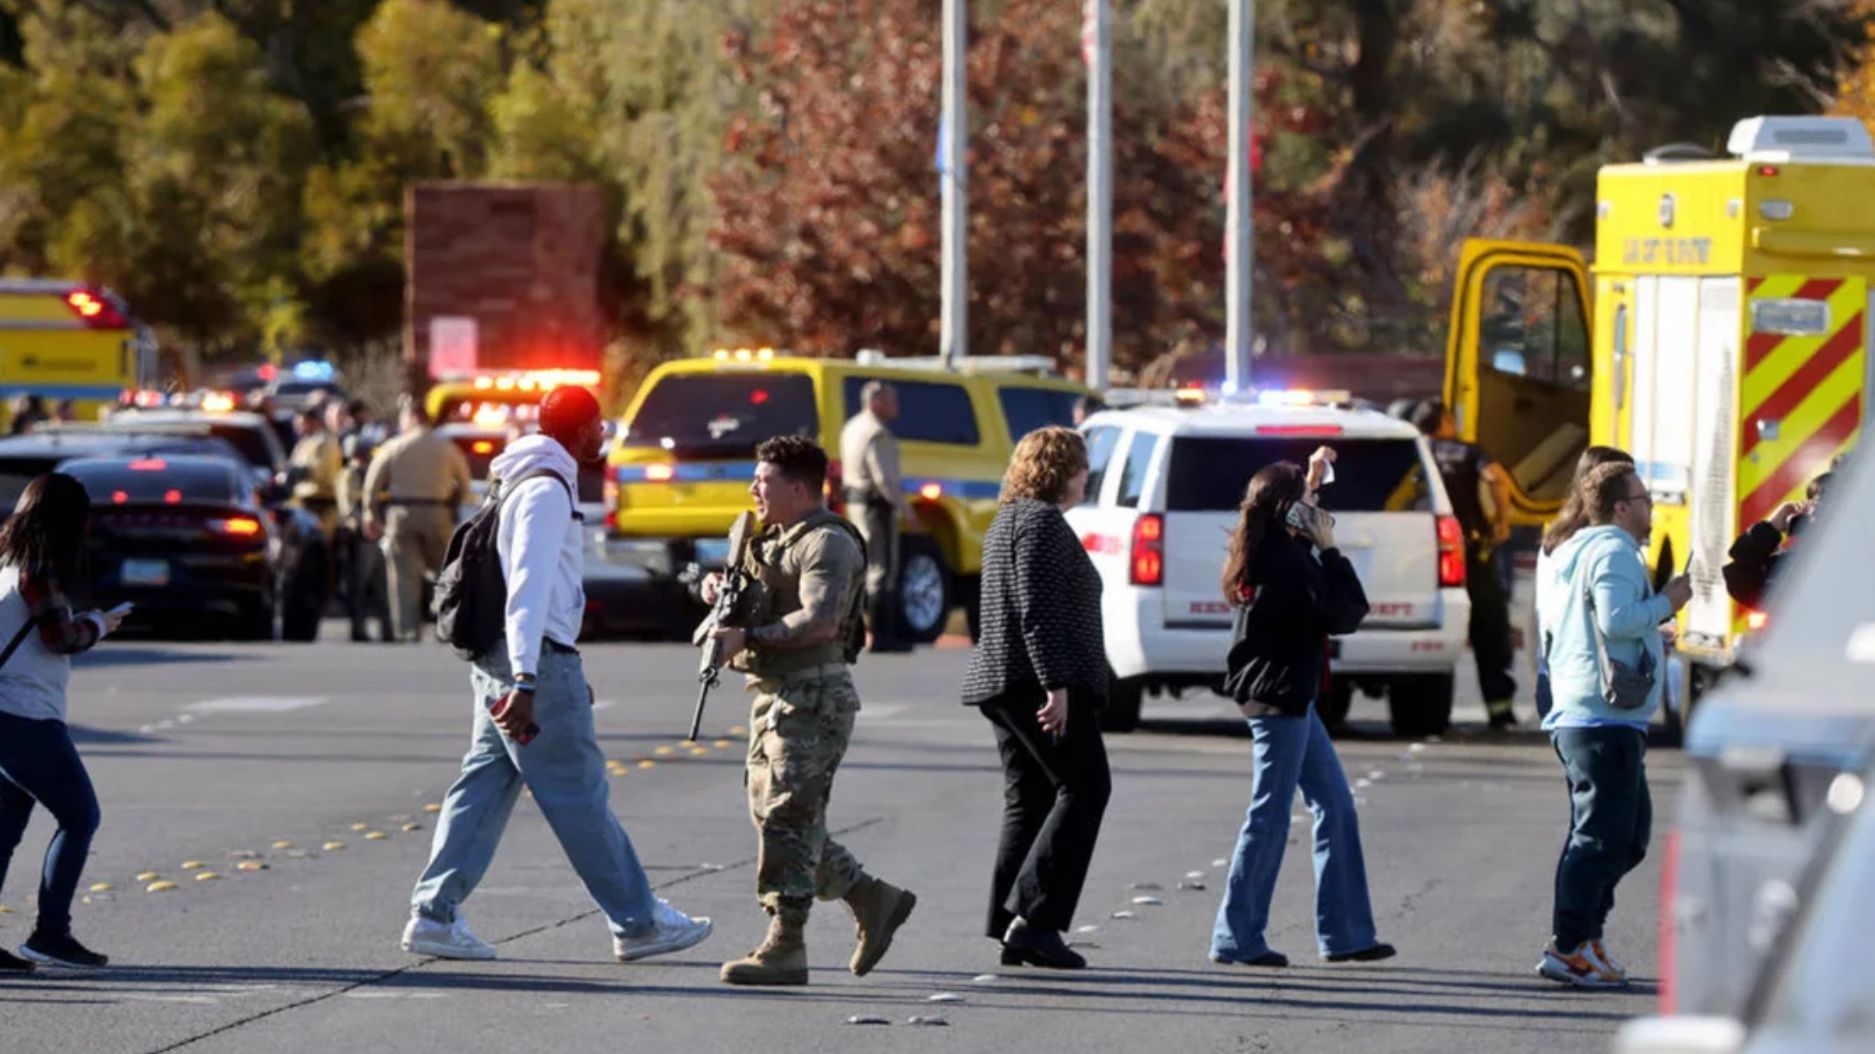 Police evacuate students at the University of Nevada, Las Vegas after a shooting Wednesday.  (Credit: KM Cannon/Las Vegas Review-Journal/Tribune News Service/Getty Images)